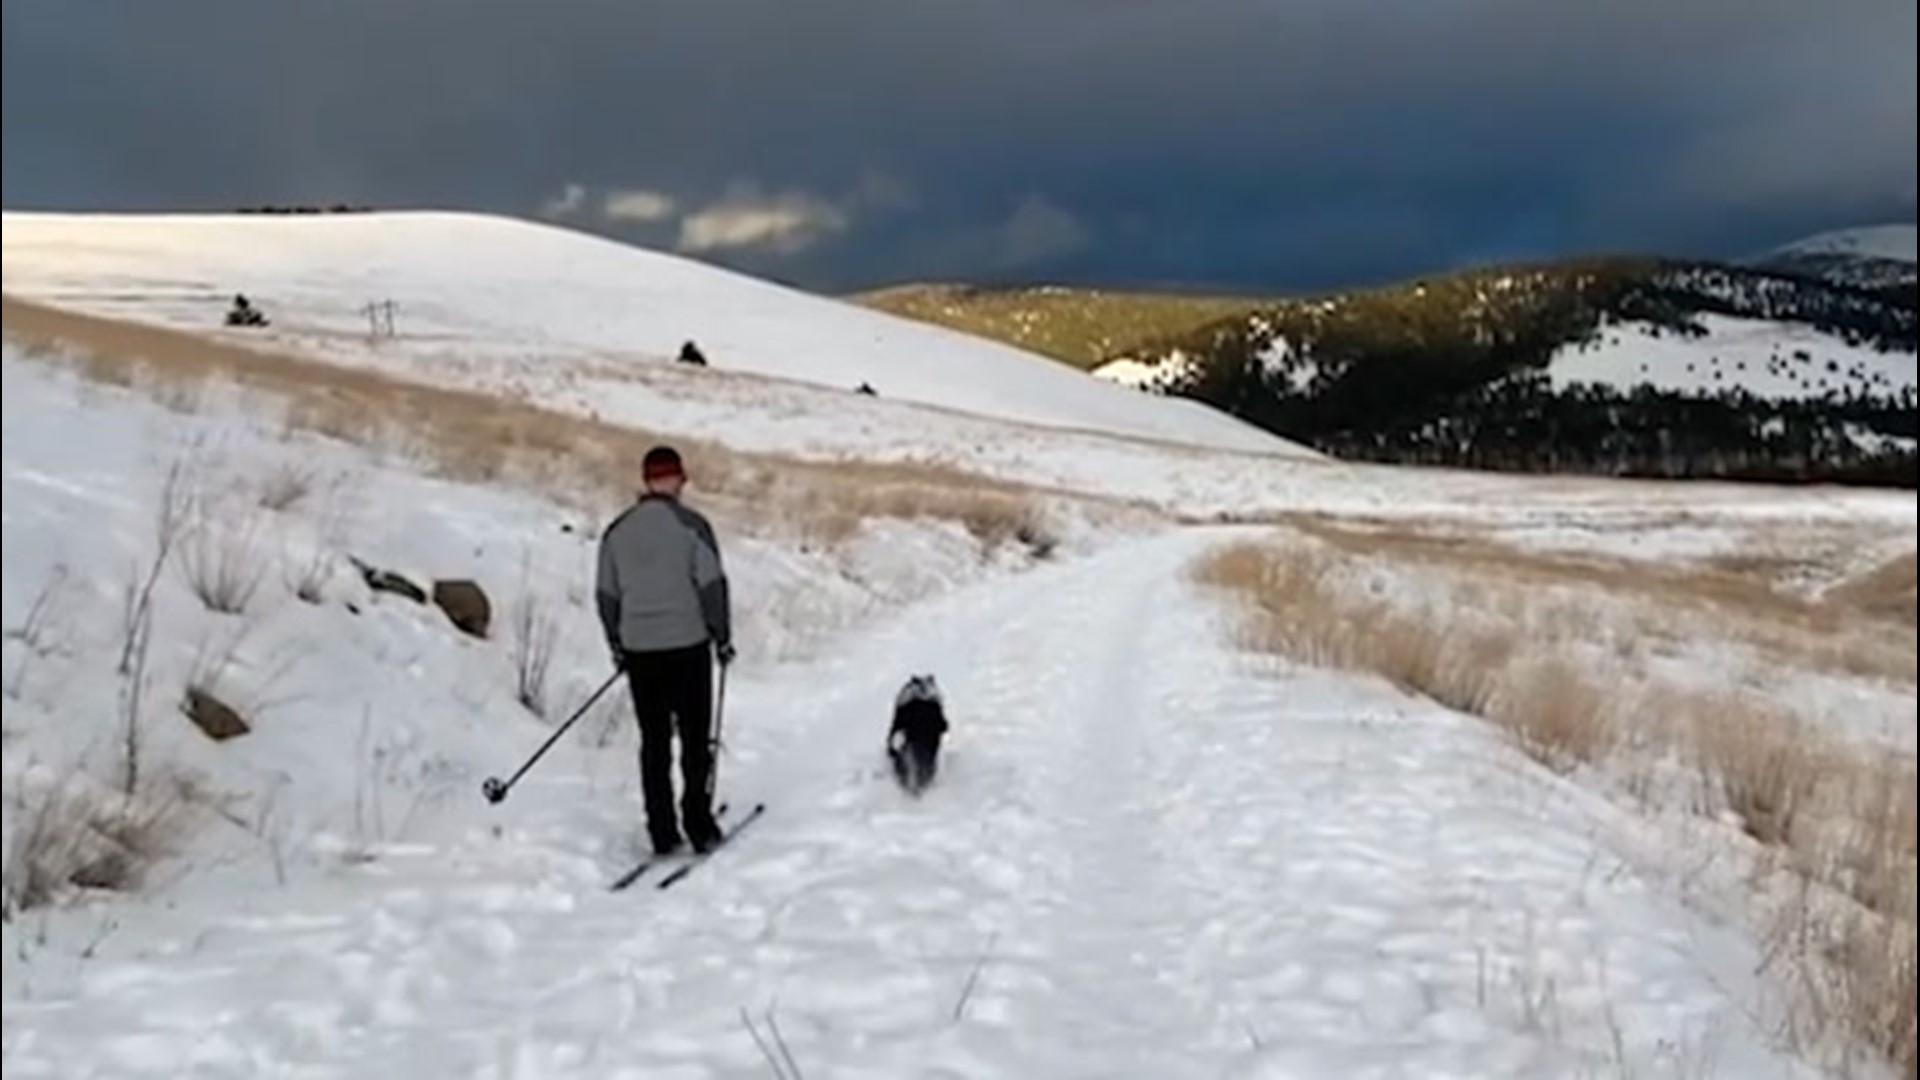 This man enjoyed the snowy weather in Montana on Feb. 22 by cross-country skiing, with his dog ScripScrap running right alongside.